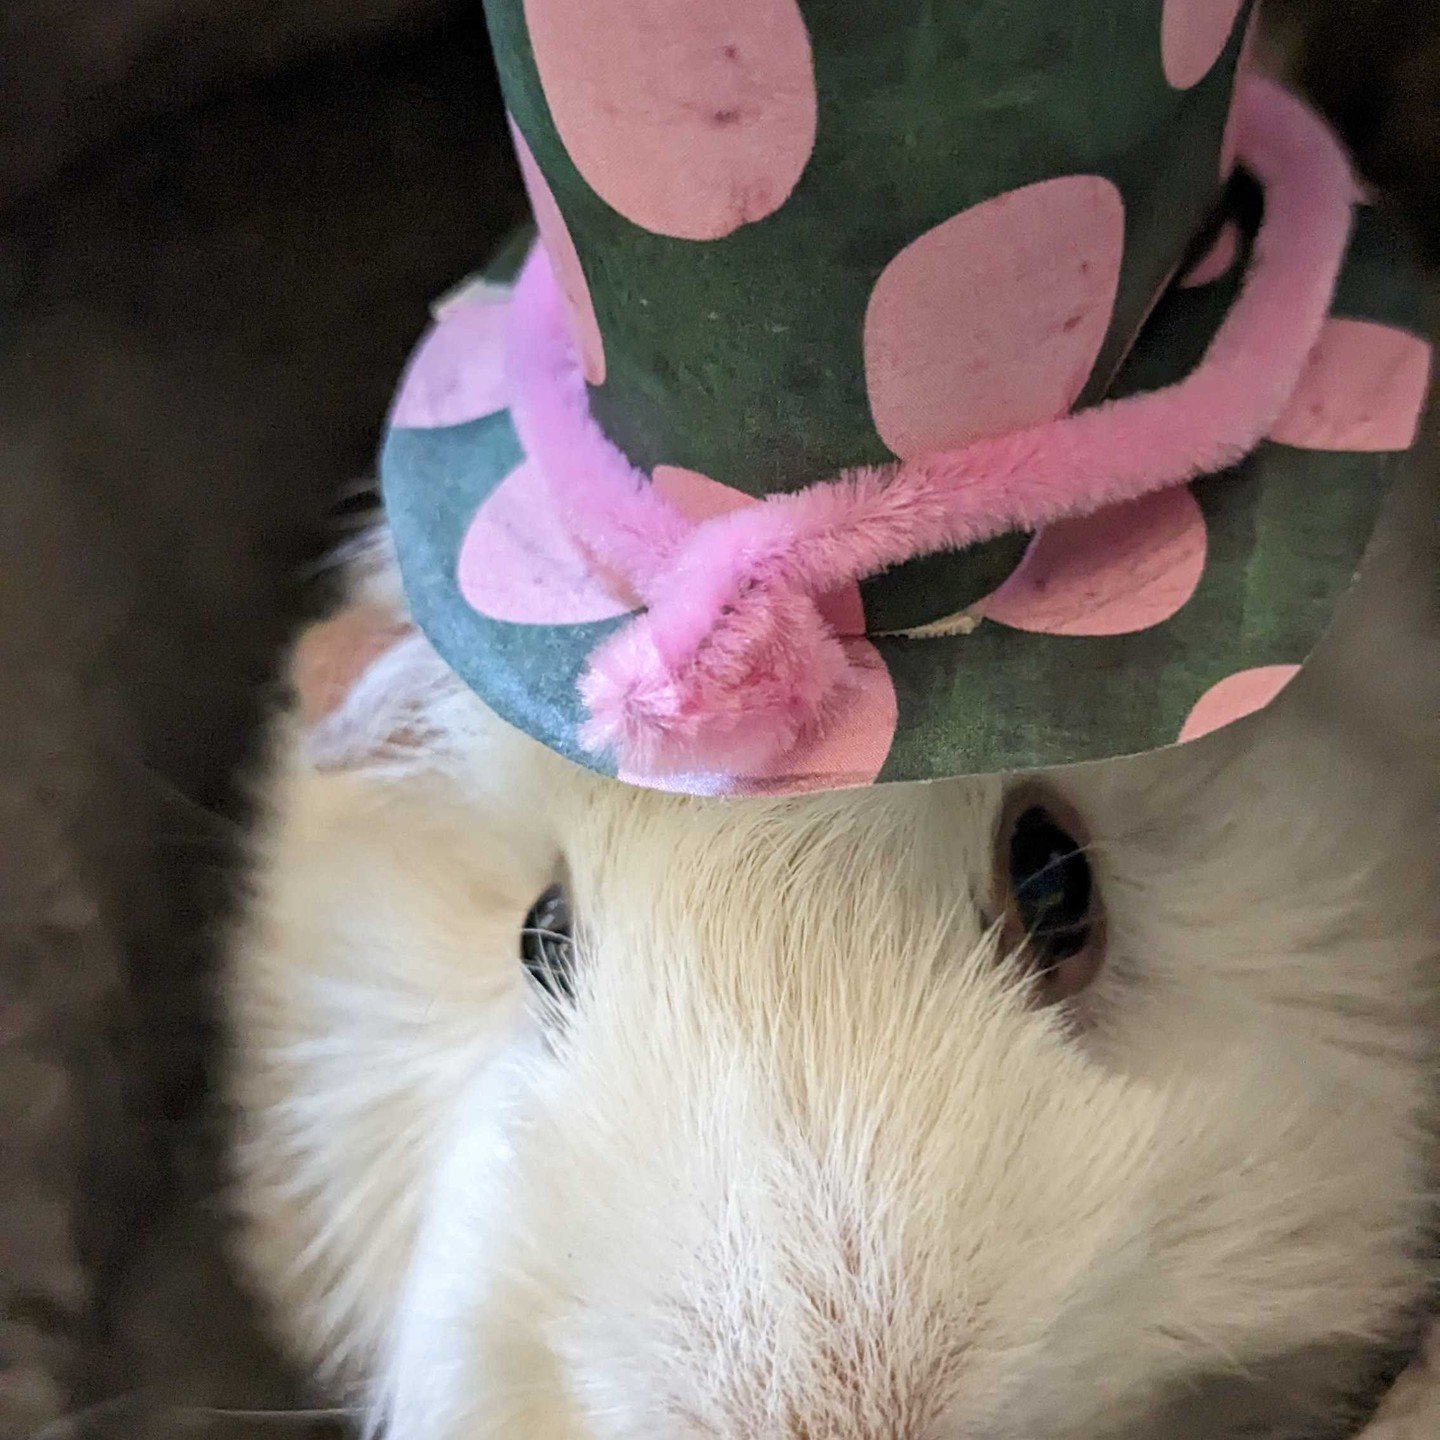 Marshmallow, the most stylish guinea pig, is peeking at you from under a one-of-a-kind, handcrafted designer hat. High fashion has no tiny size limit at Cultivate Care Farms.

#CultivateCareFarms #BoltonMA #FarmBasedTherapy #TherapyGuineaPig